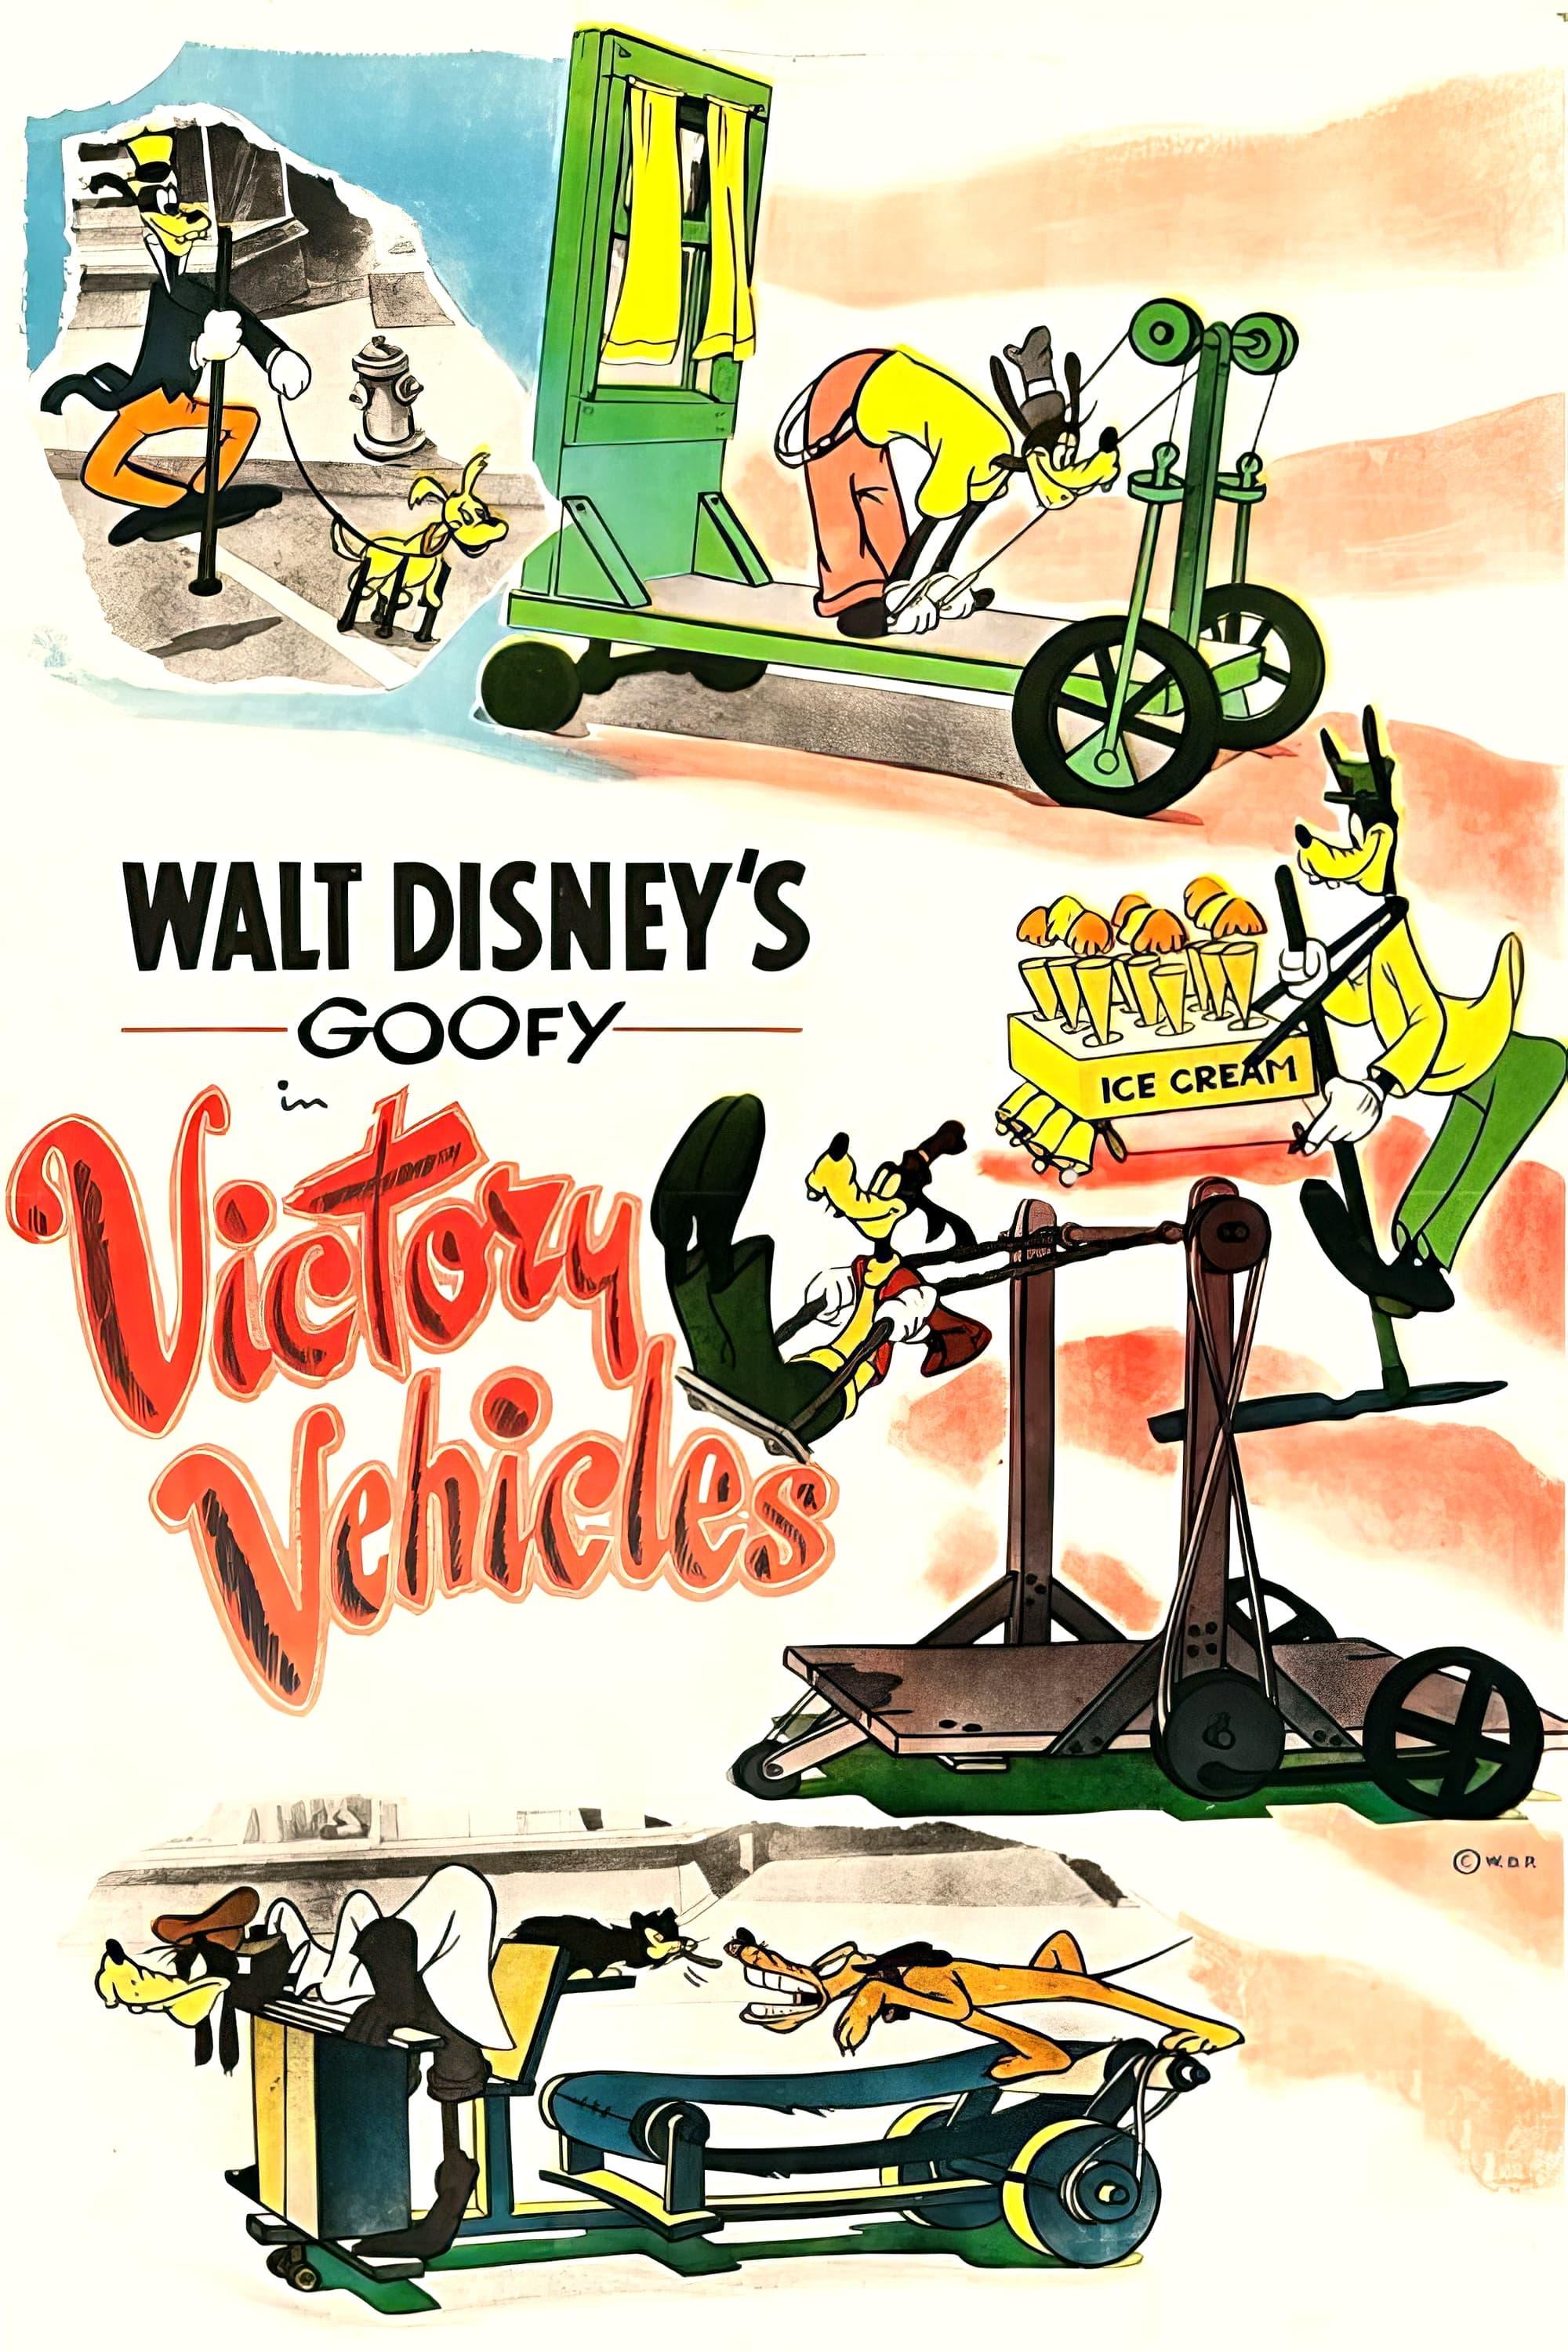 Victory Vehicles poster